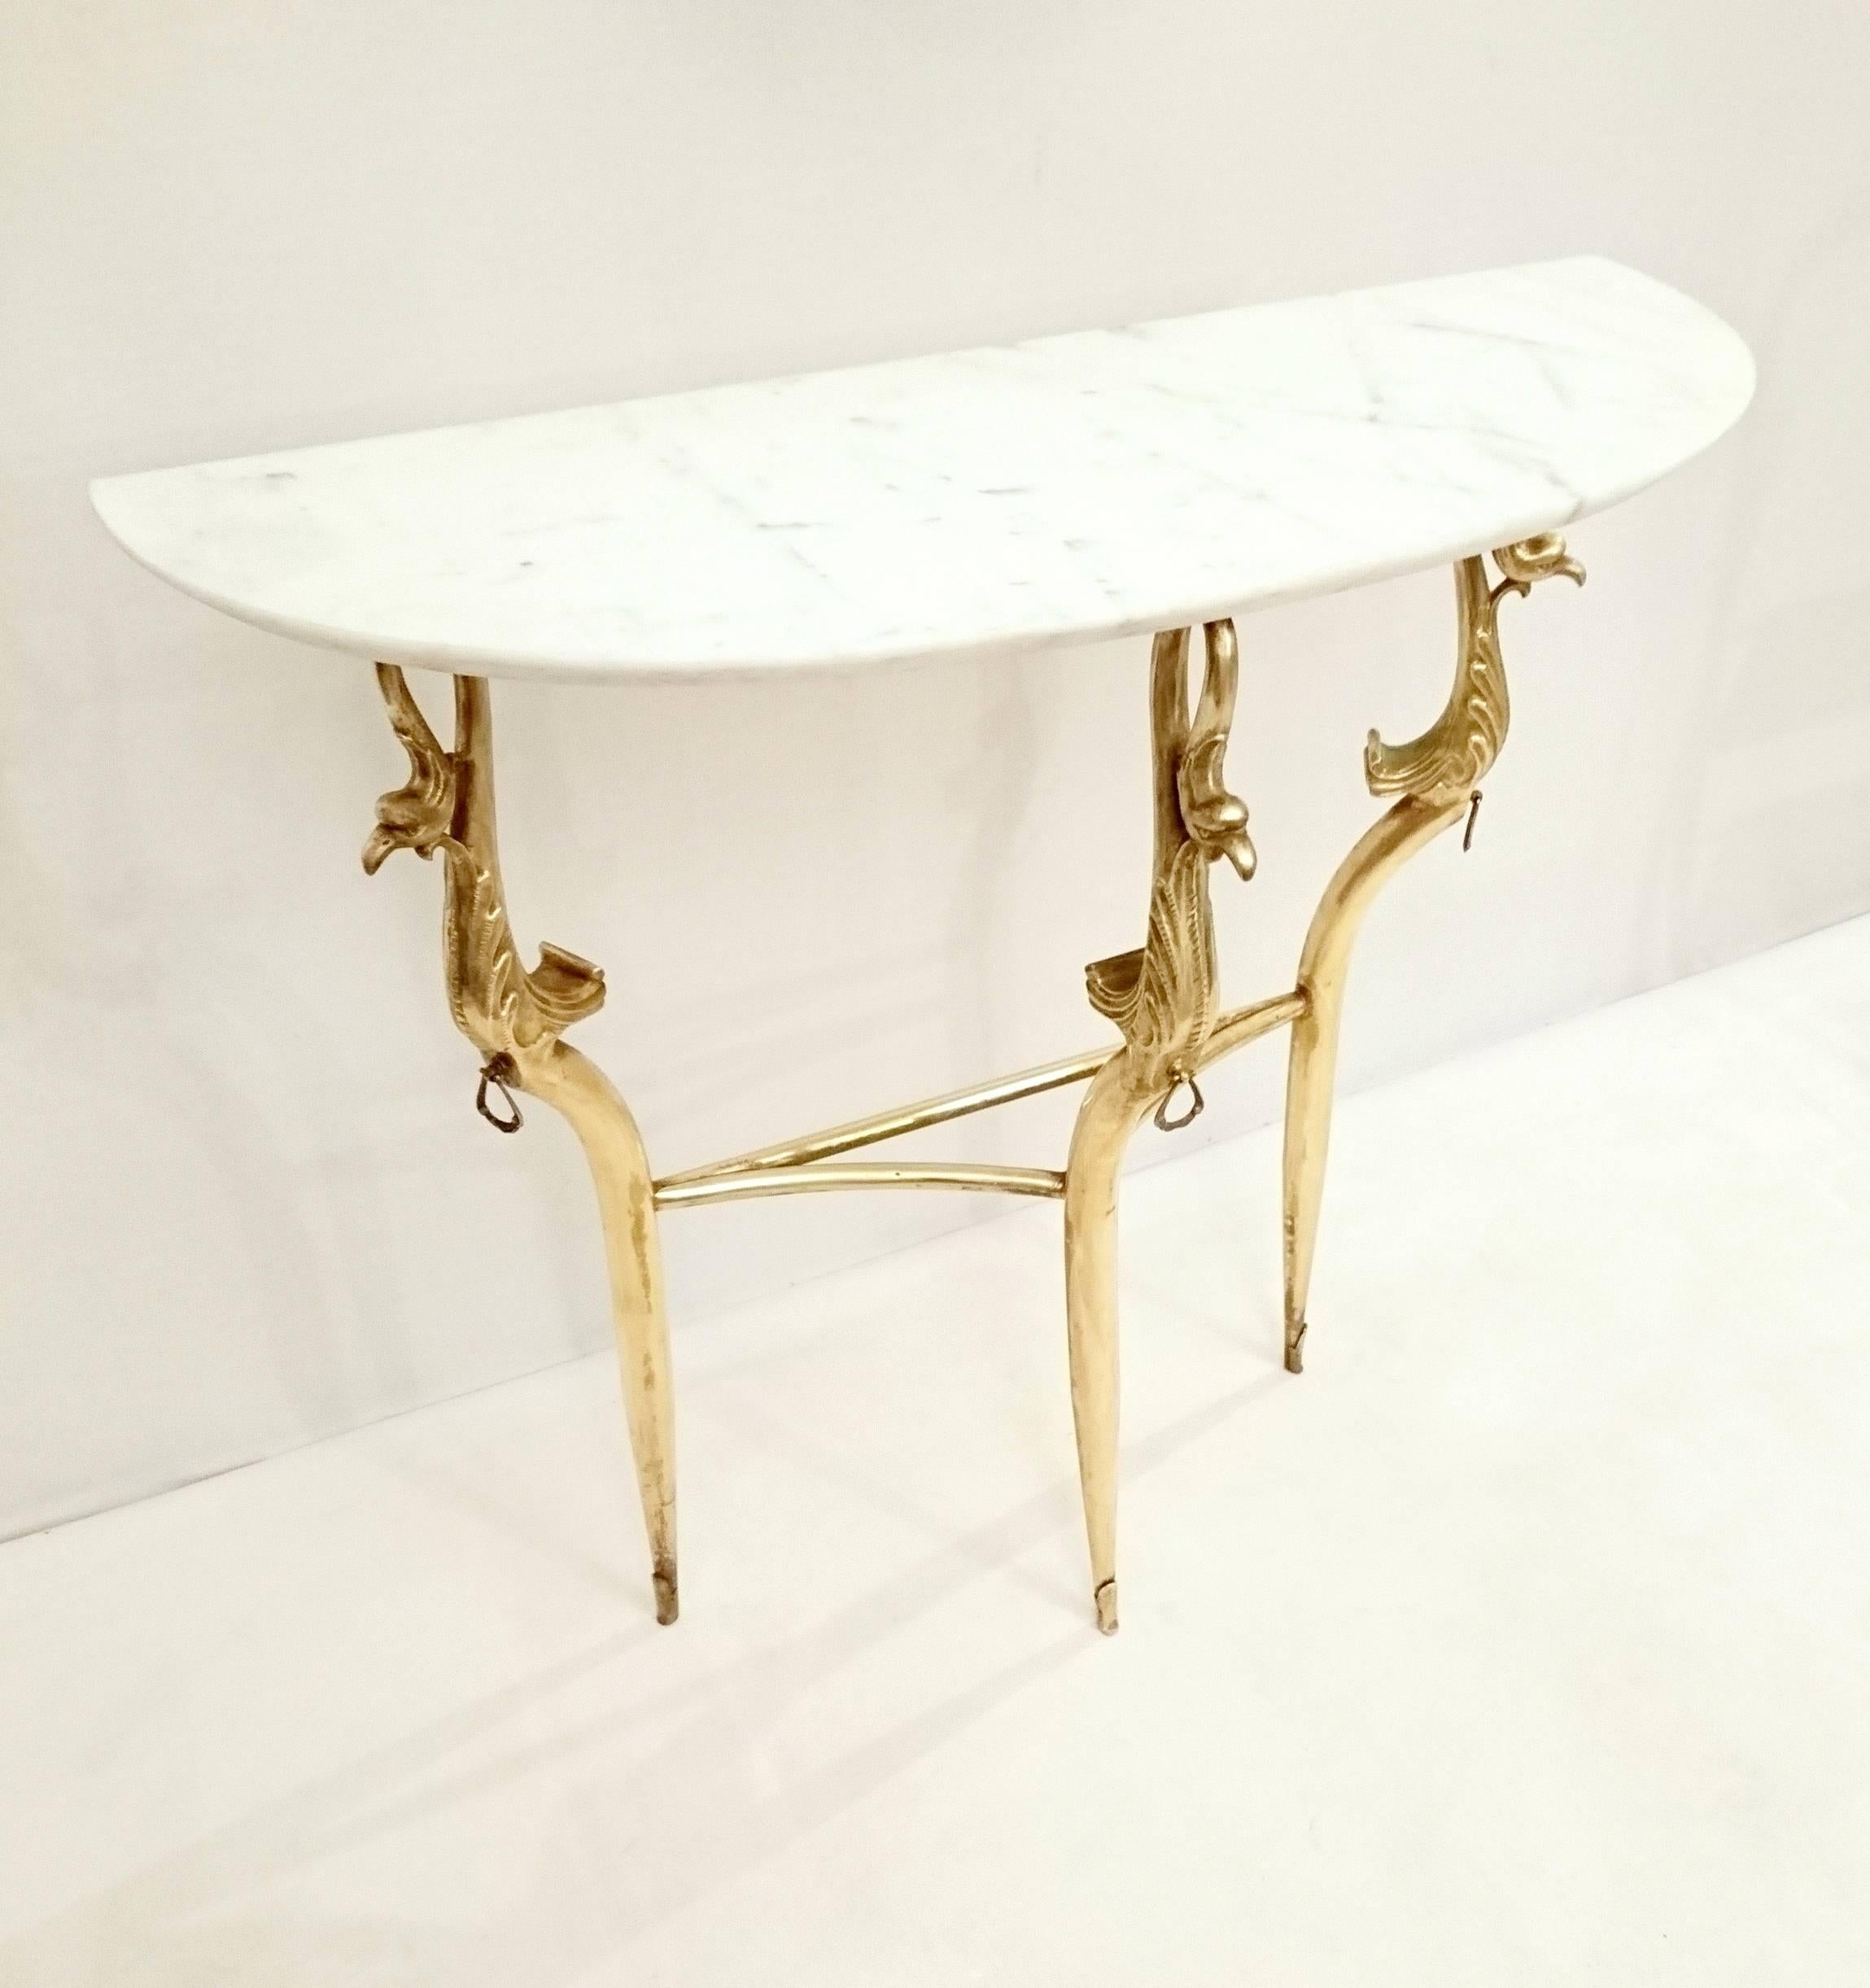 Italian console table in Carrara marble and brass made in the 1950s in Empire style with an oval mirror. The mirror measures 78 x 50 cm.